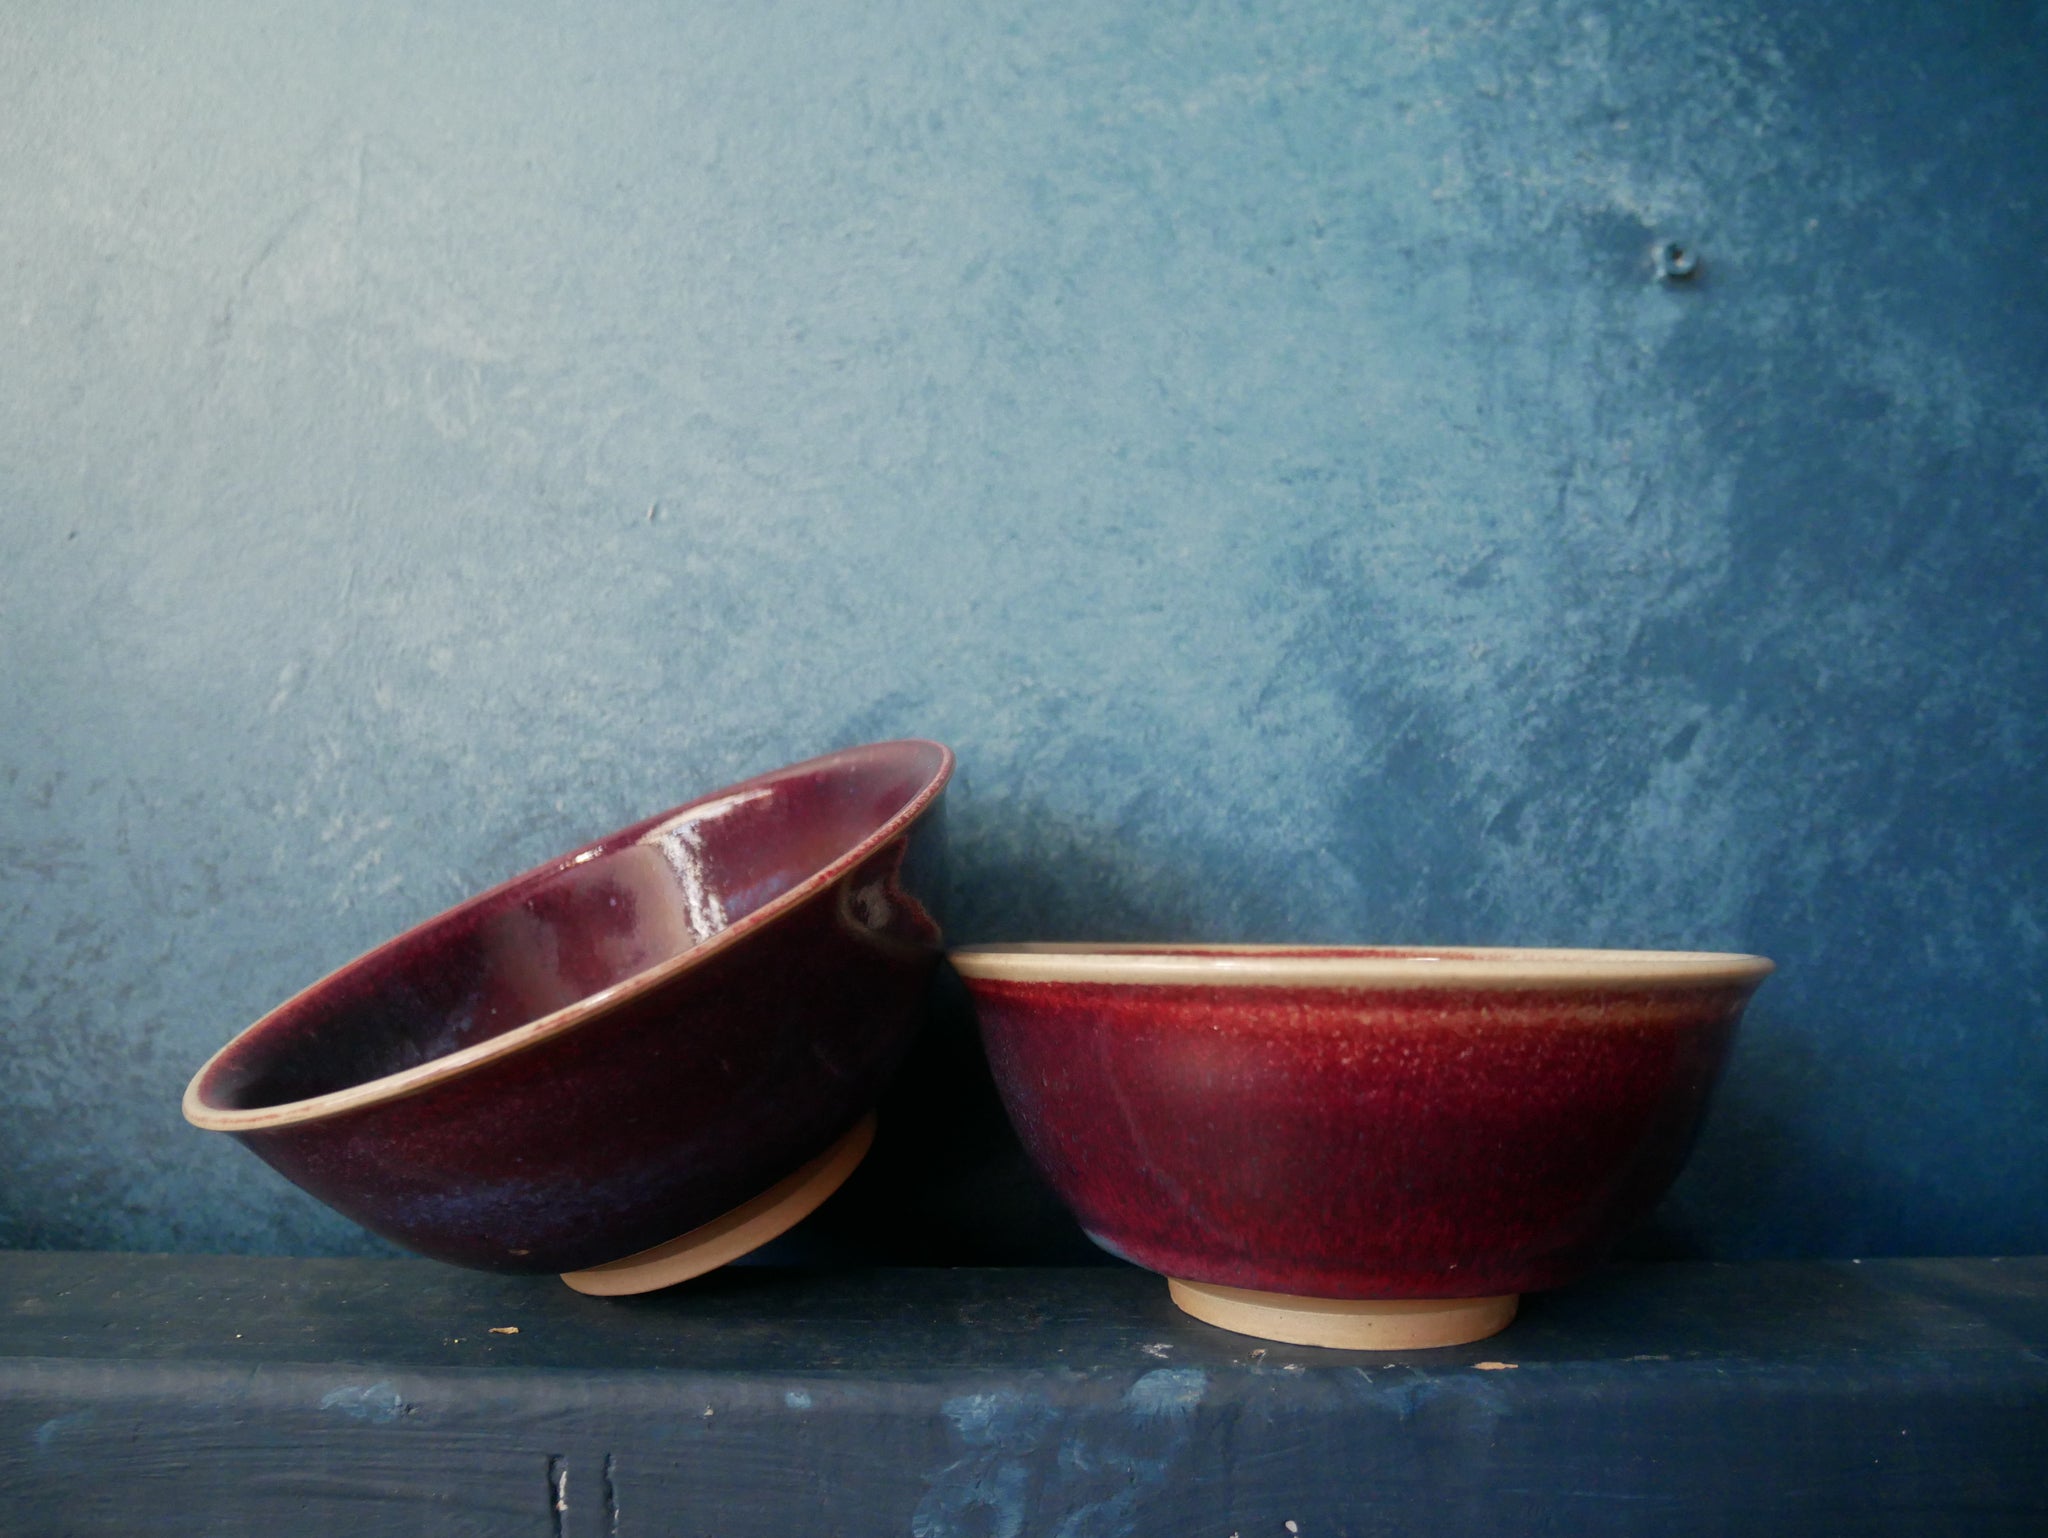 Copper red bowls